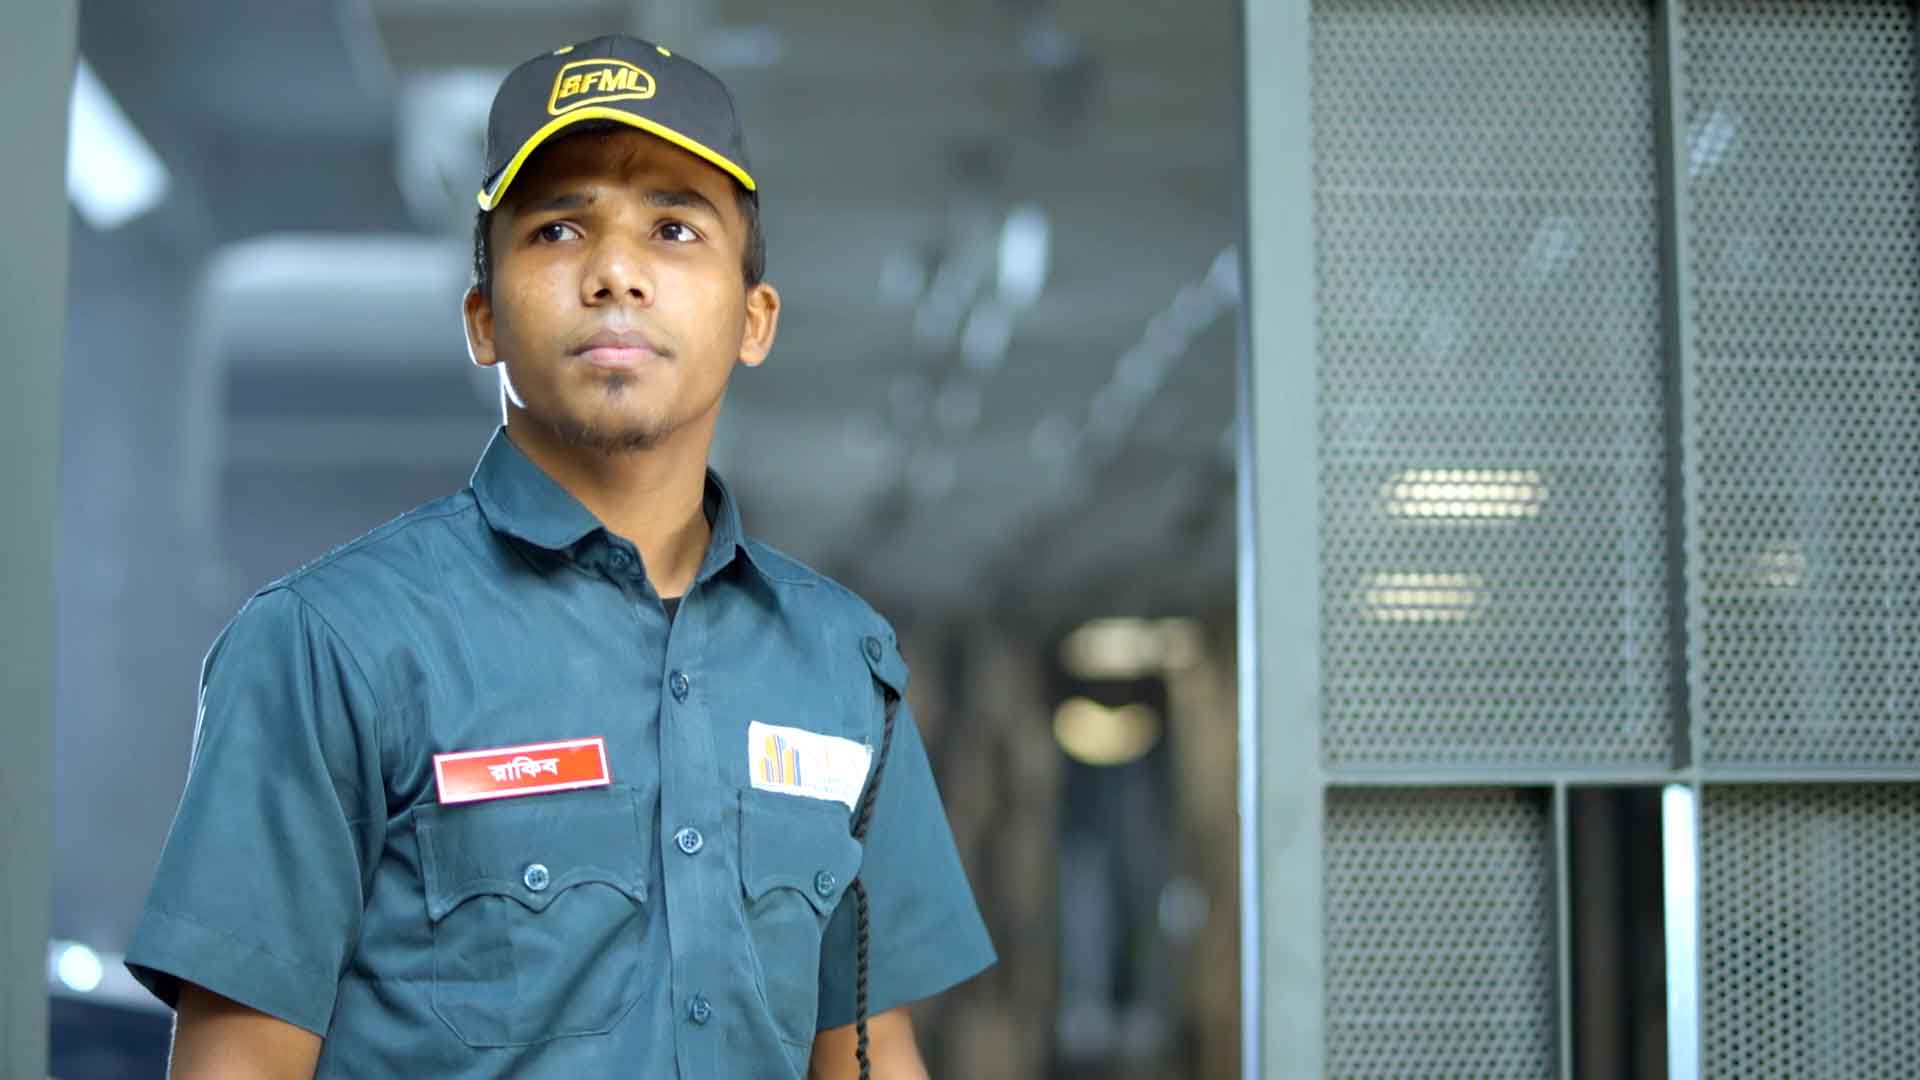 Arif Sonnet's 'Safety and Security for Everyone' corporate documentary for Sublime Security Ltd emphasizes the importance of safety.